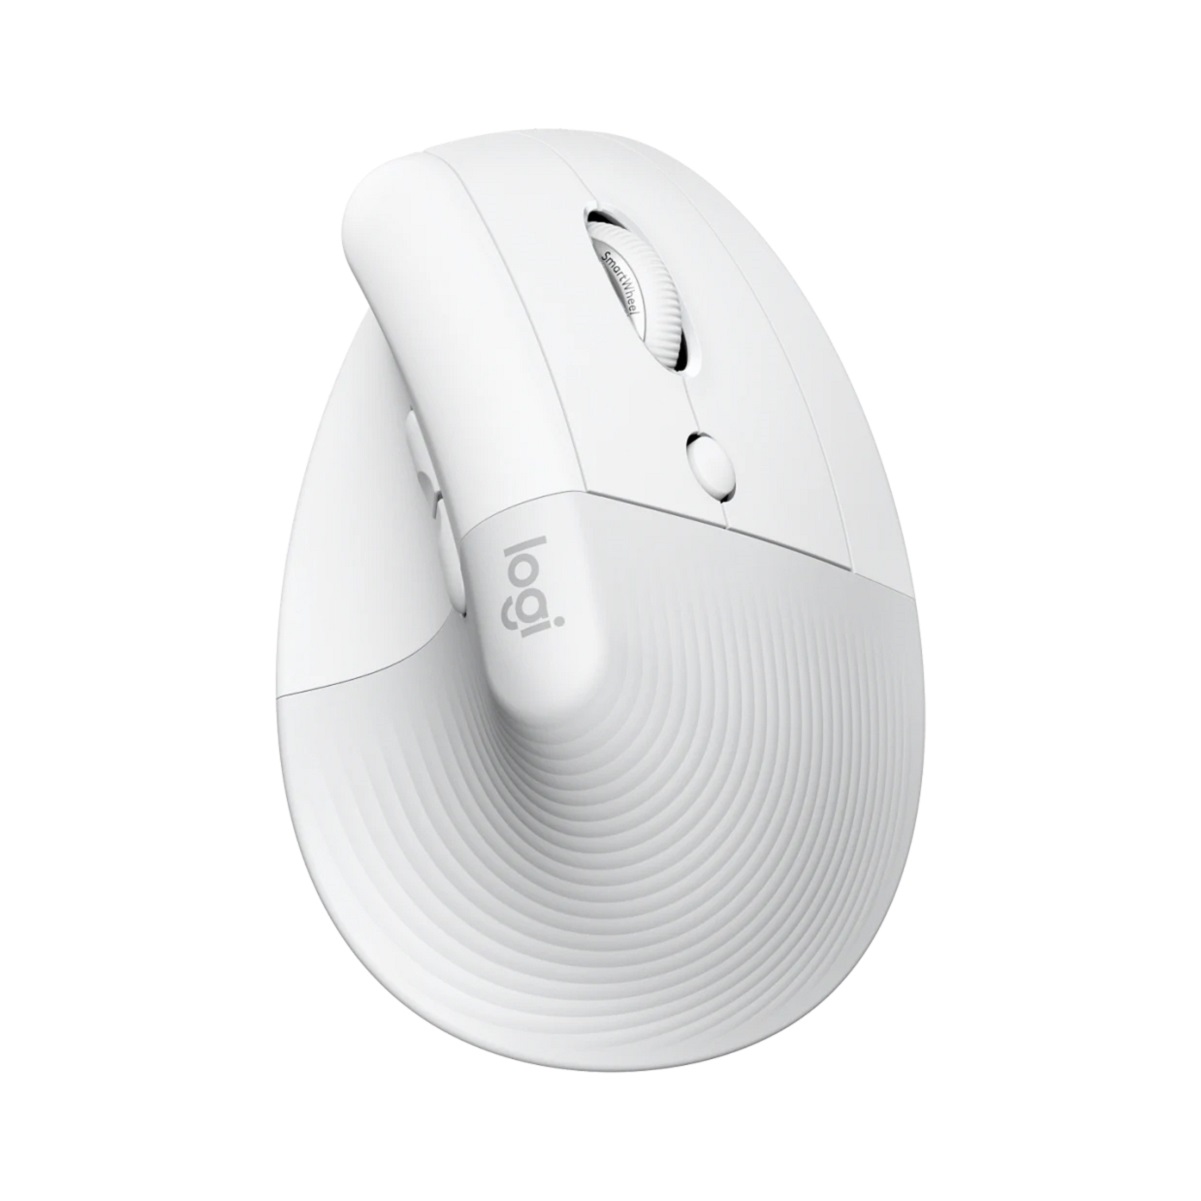 Logitech LIFT Wireless Mouse, , large image number 1